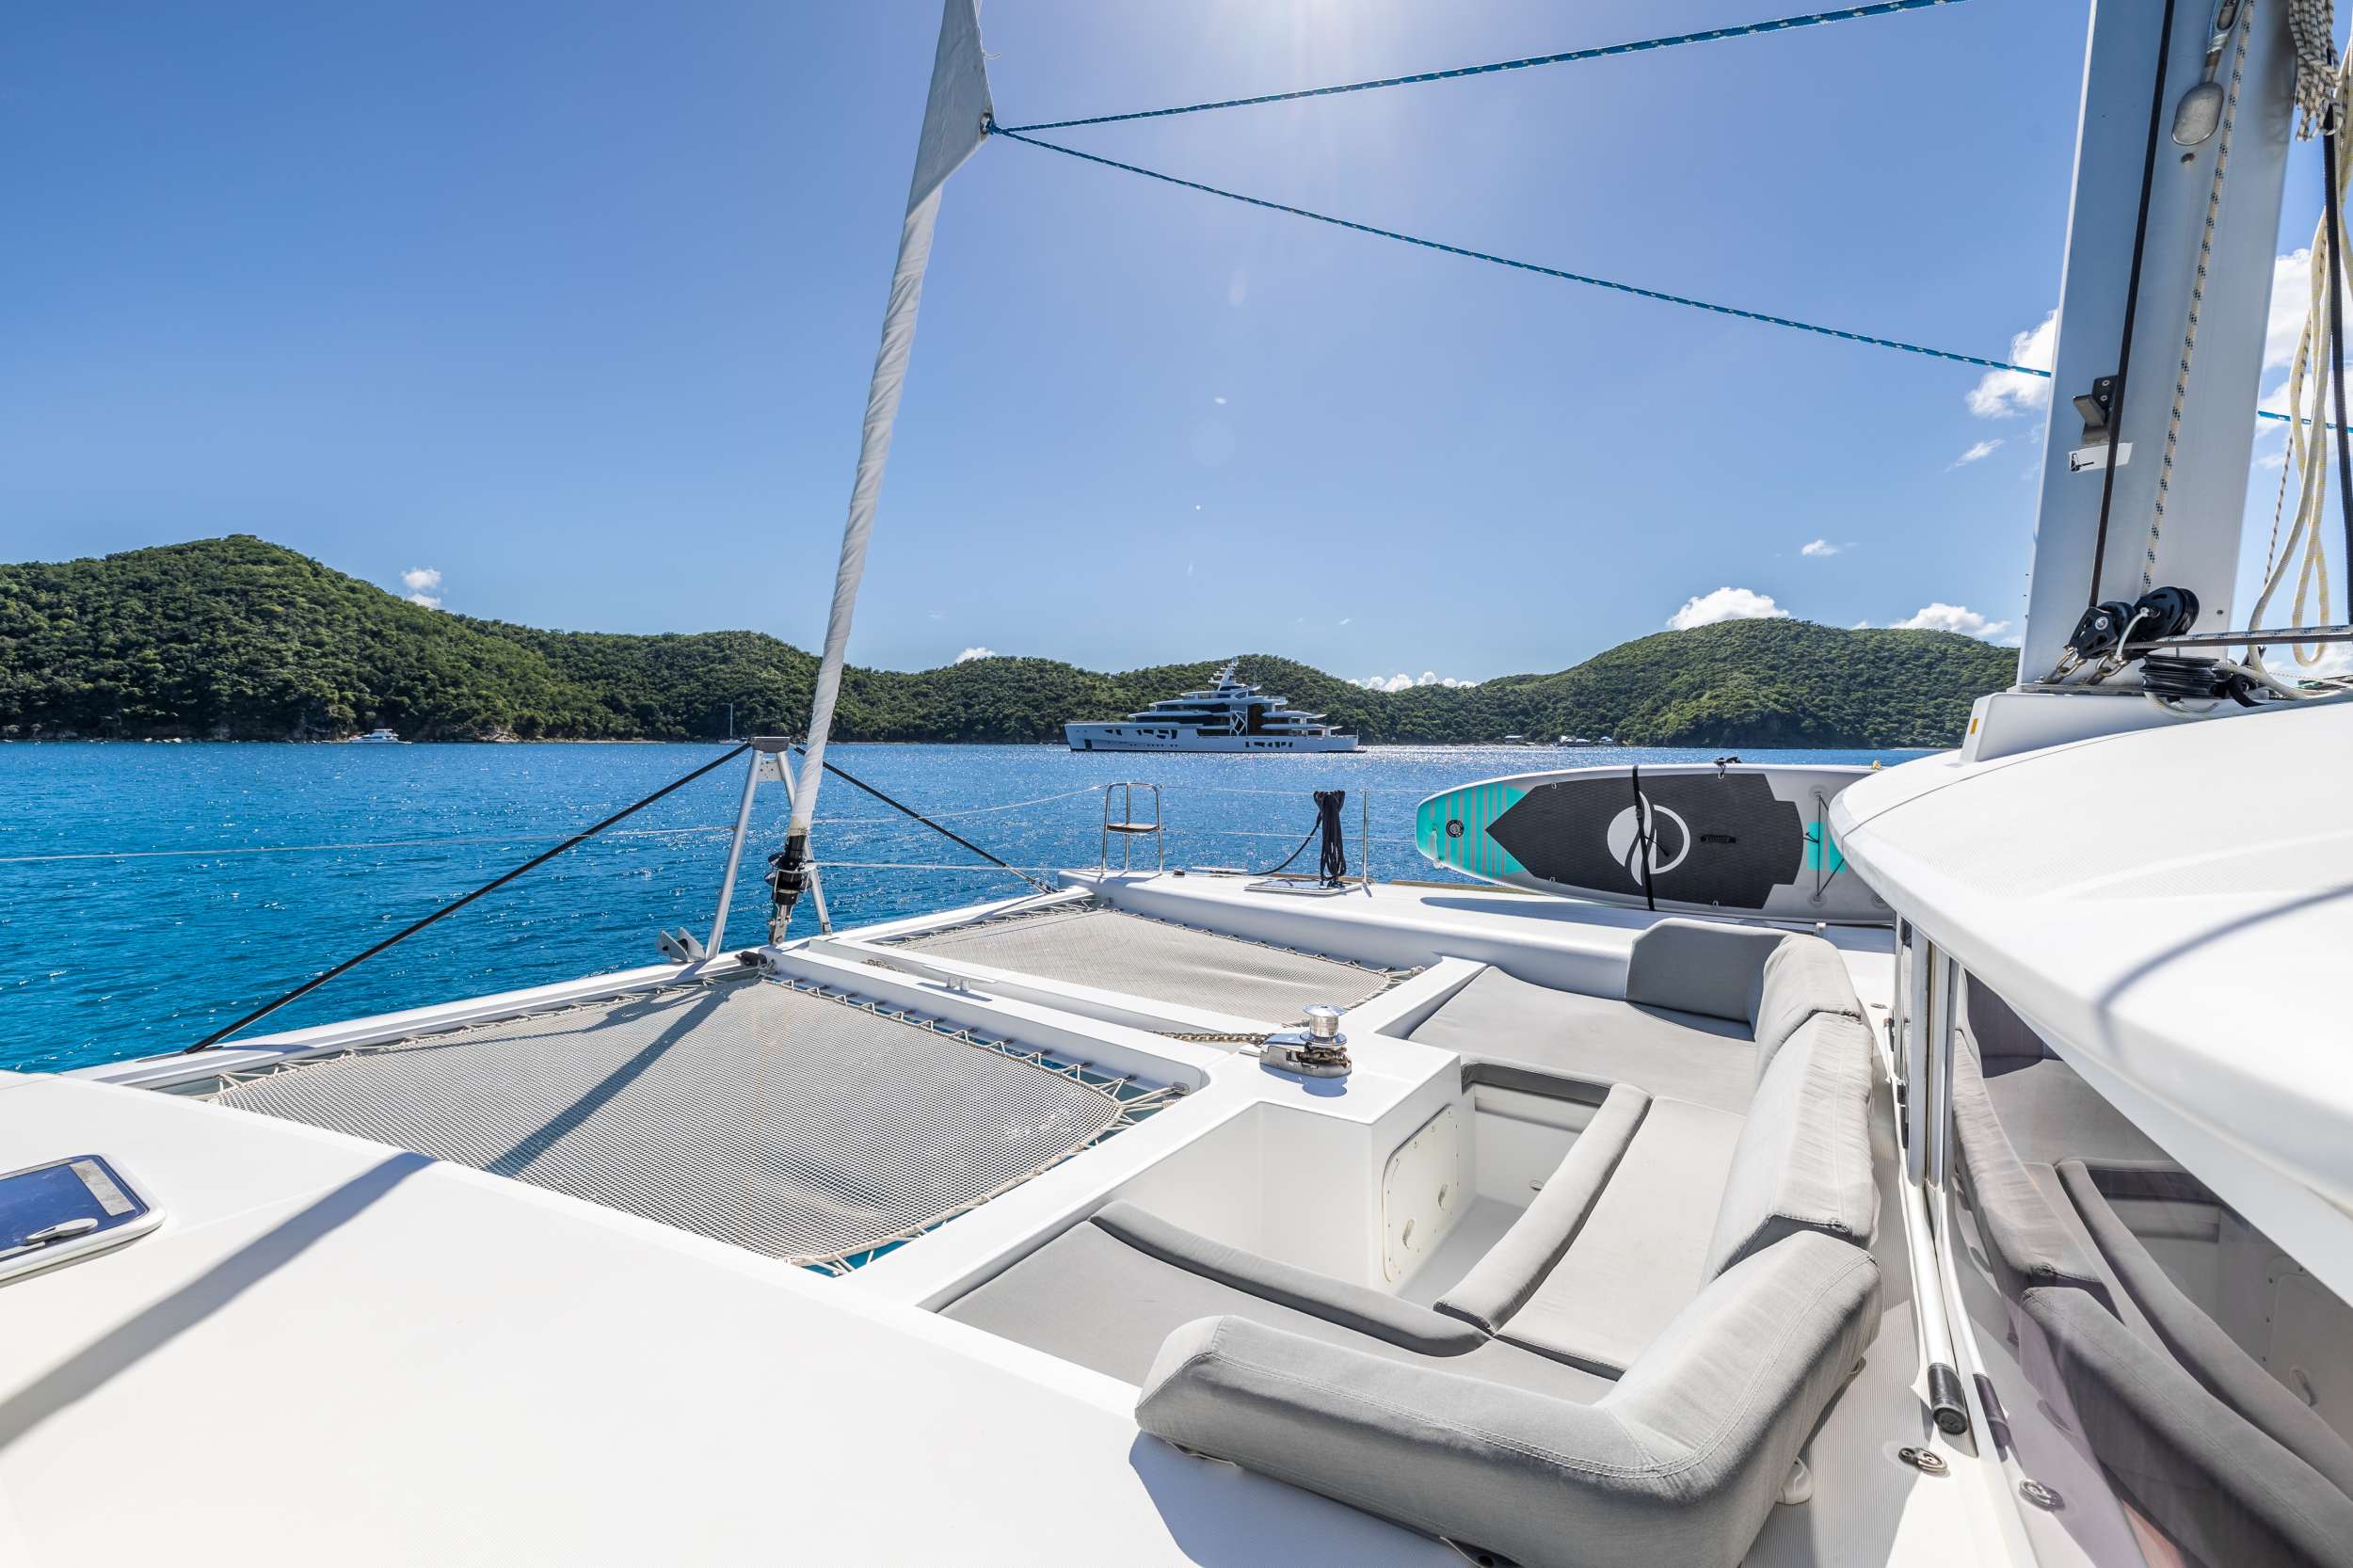 MISS SUMMER Yacht Charter - Lounging on the foredeck